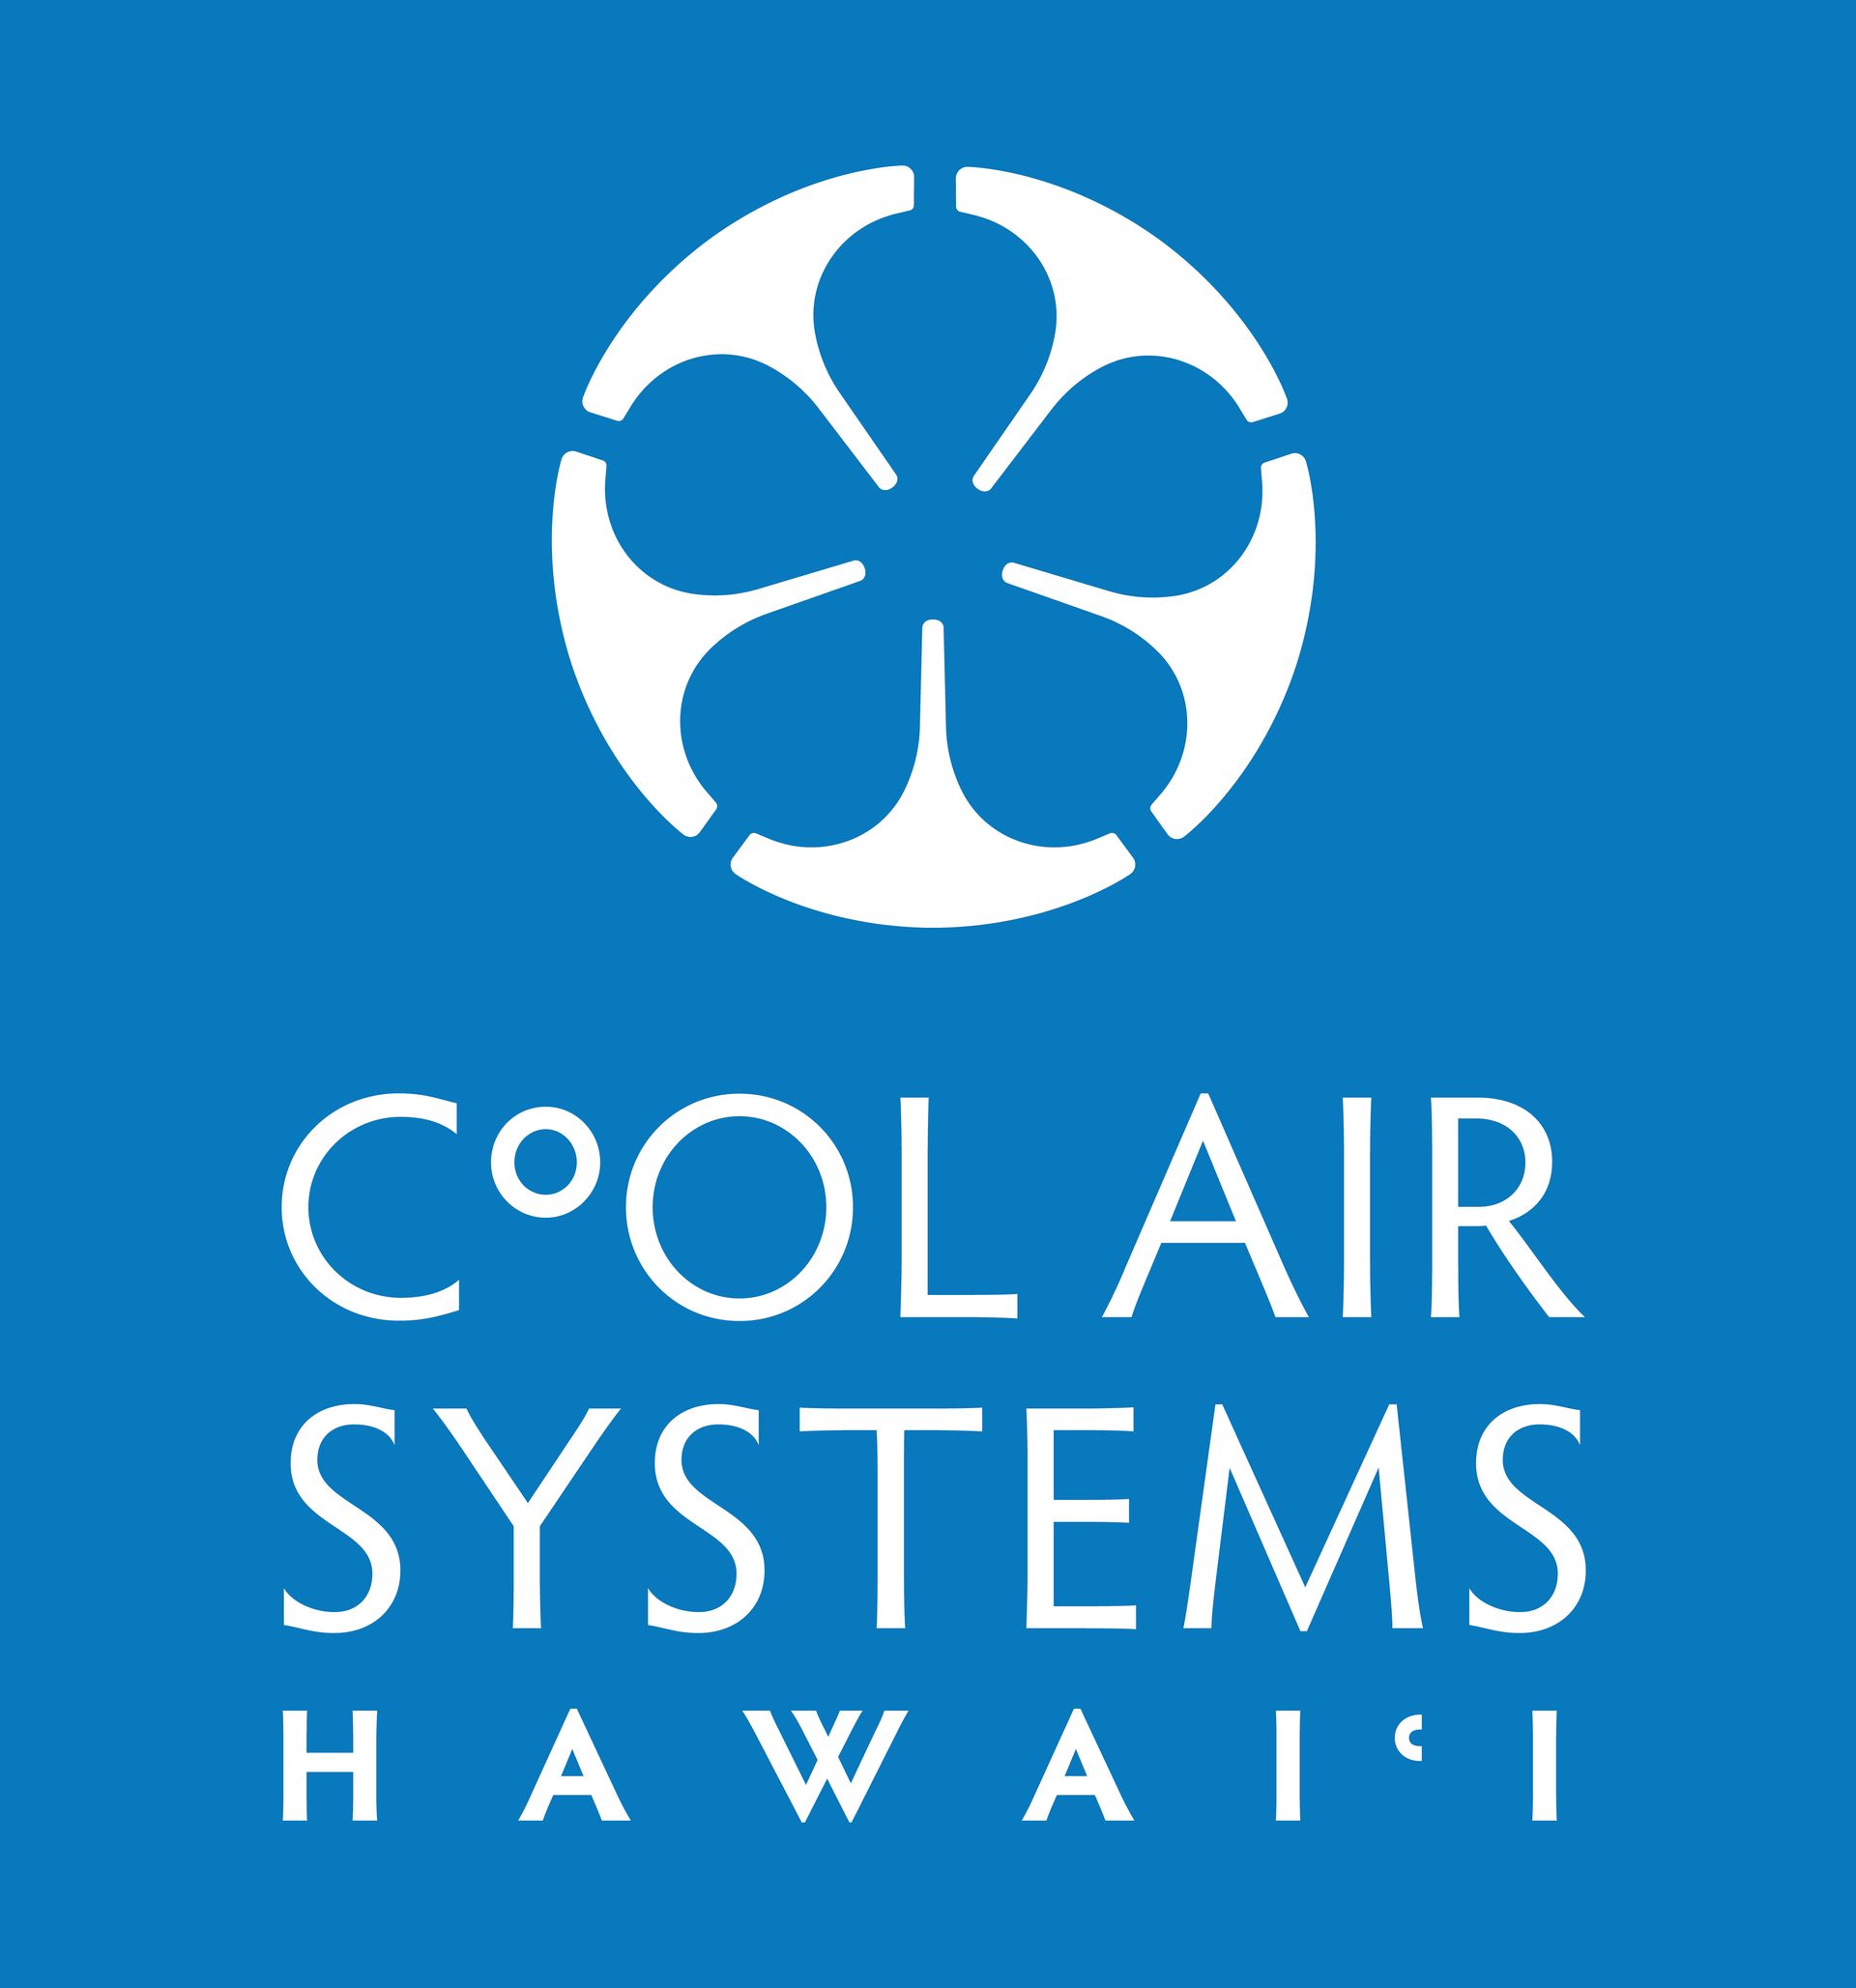 Cool Air Systems Hawaii providing all your Airconditioning needs in Kailua,HI